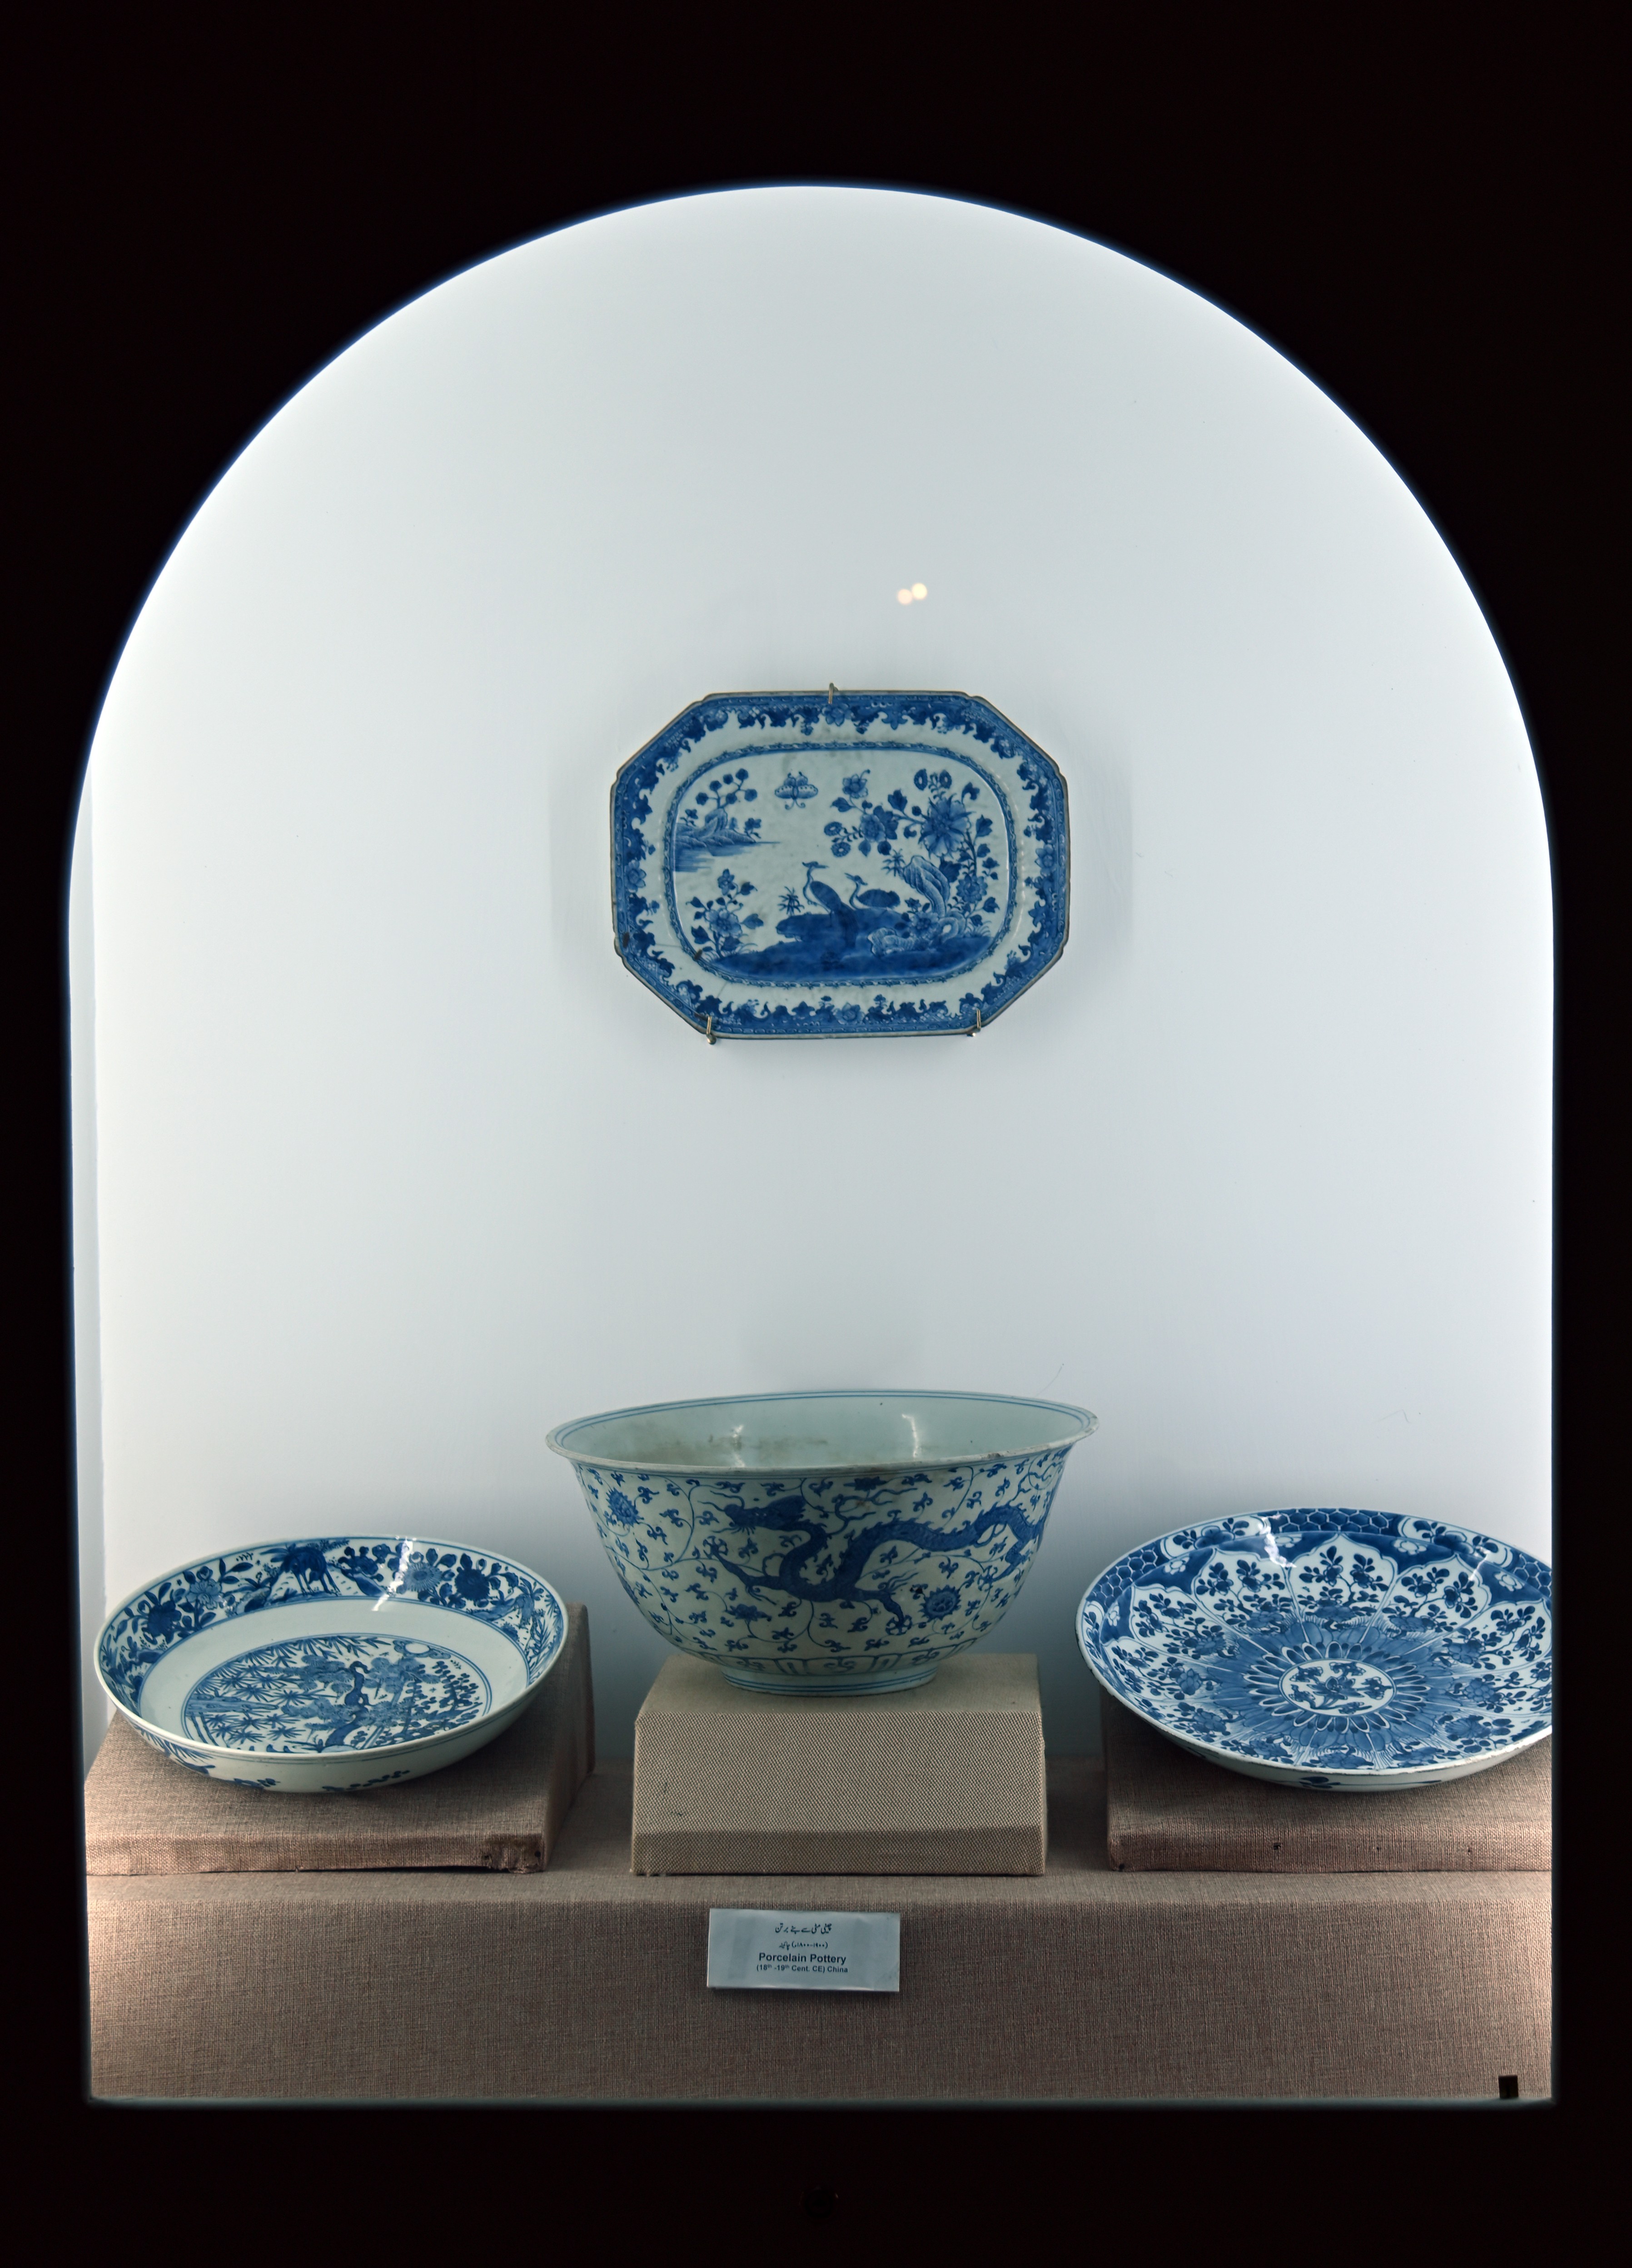 The Porcelain Pottery